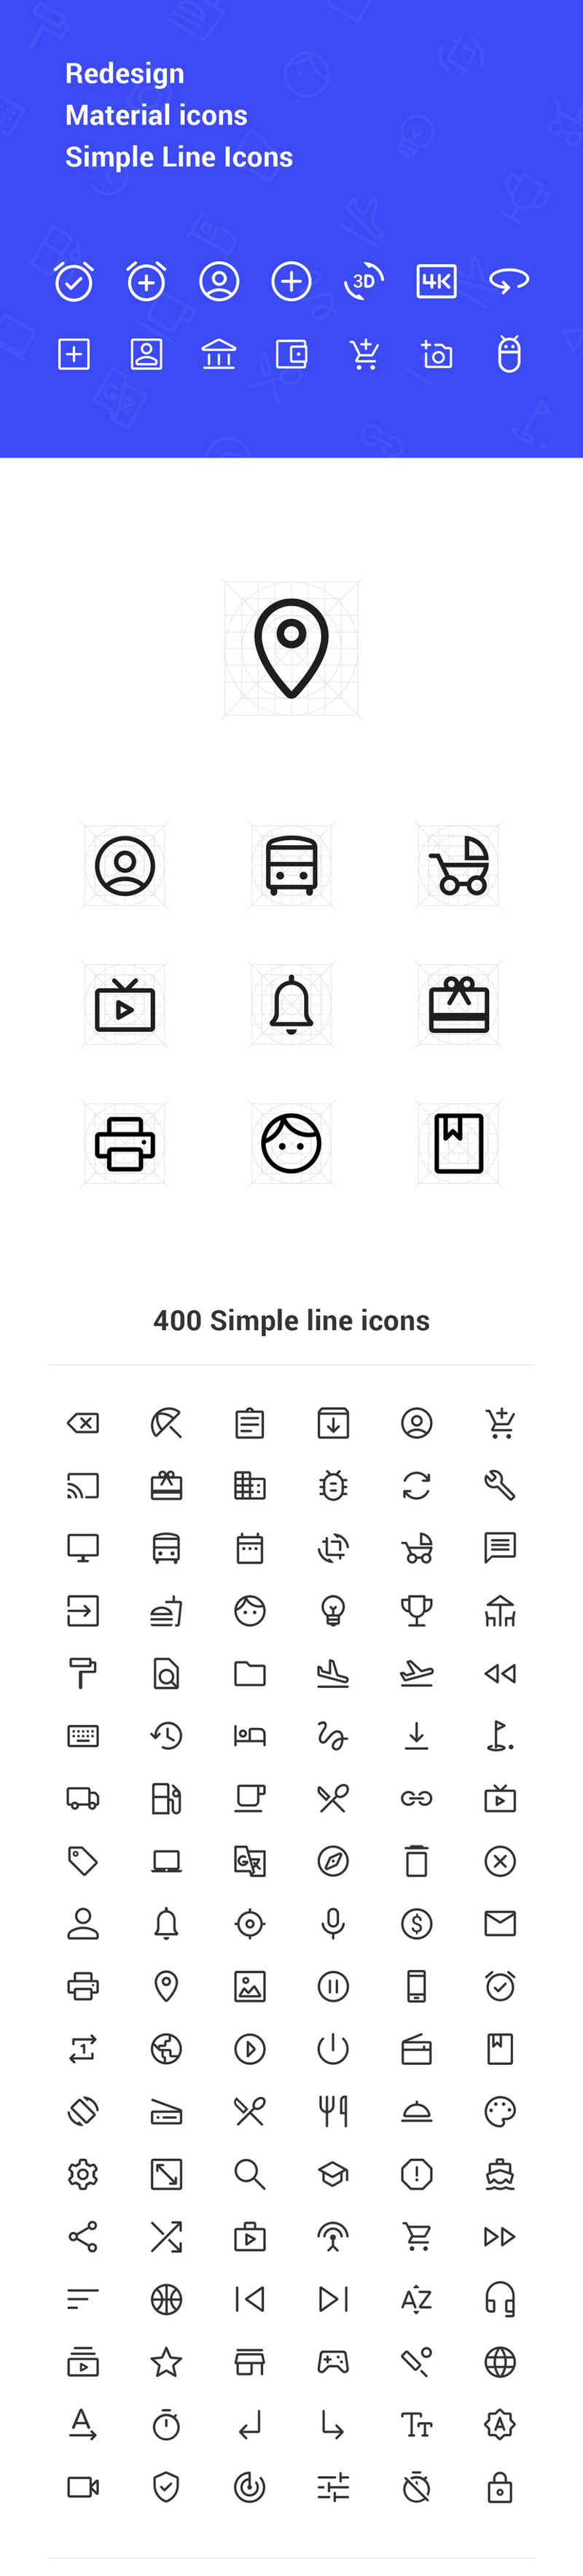 Download Material Design Simple Line Svg Icon Pack Bypeople